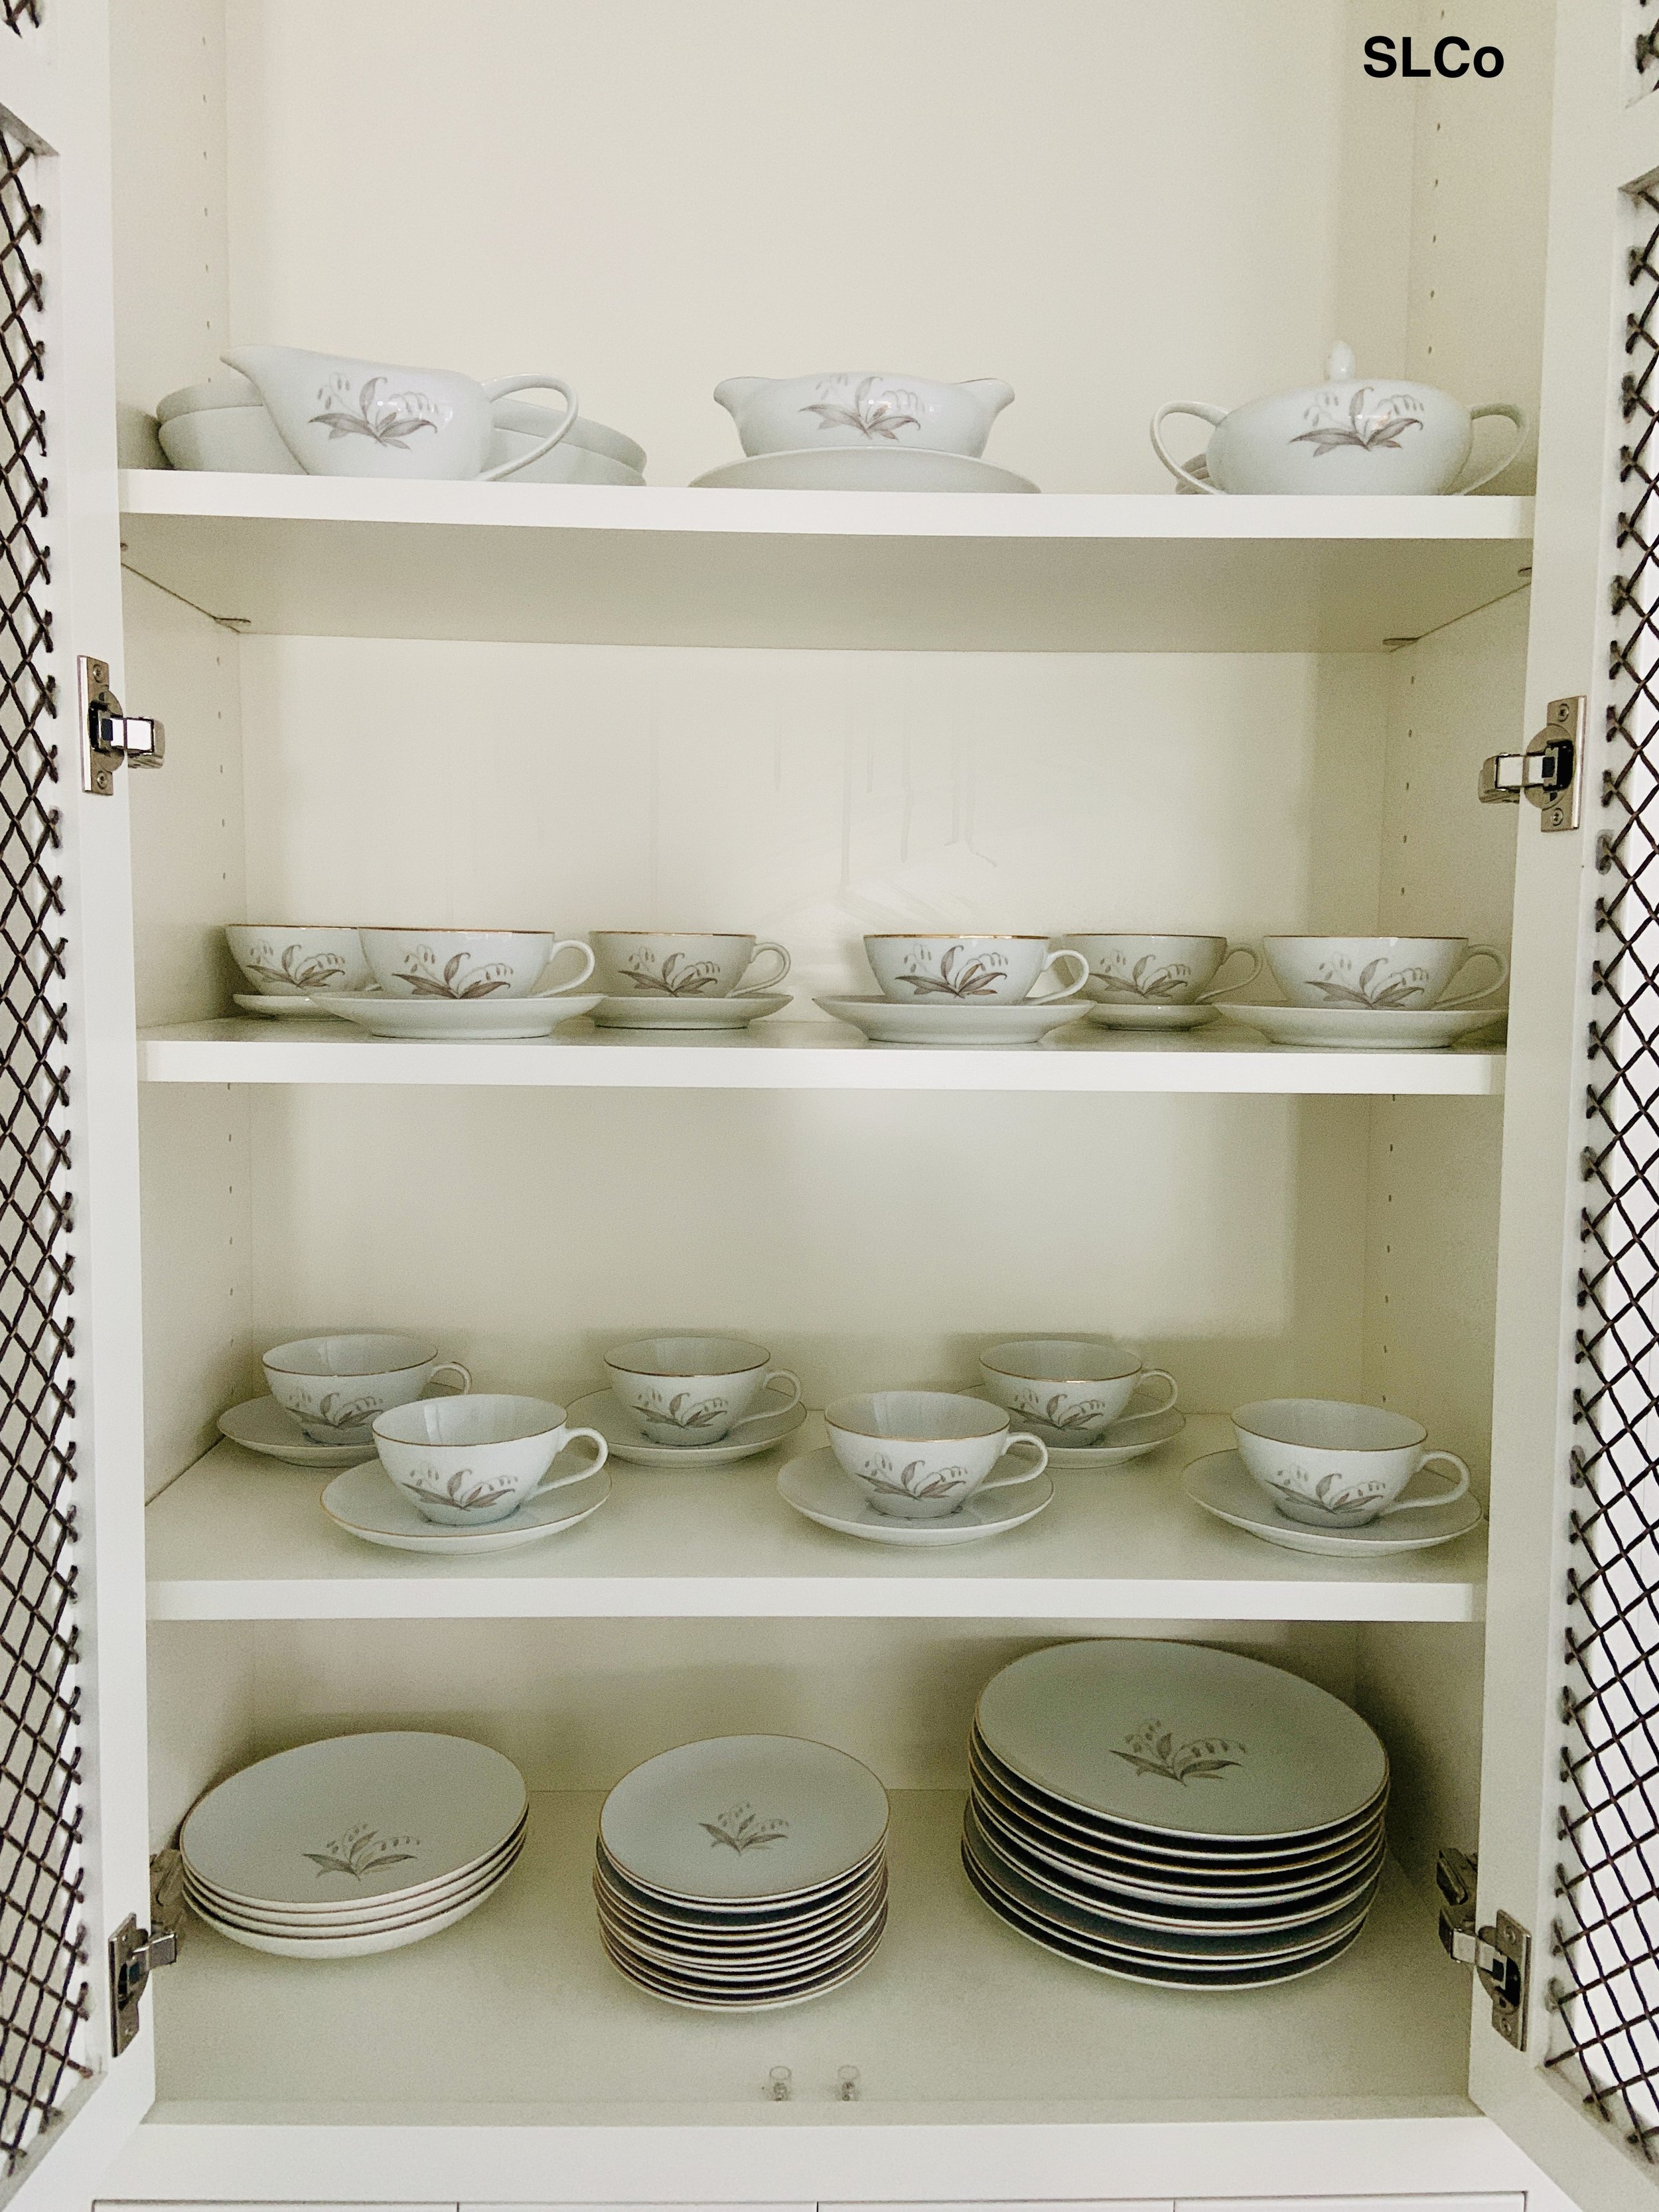 Teaware neatly places on drawers in a cabinet in kitchen